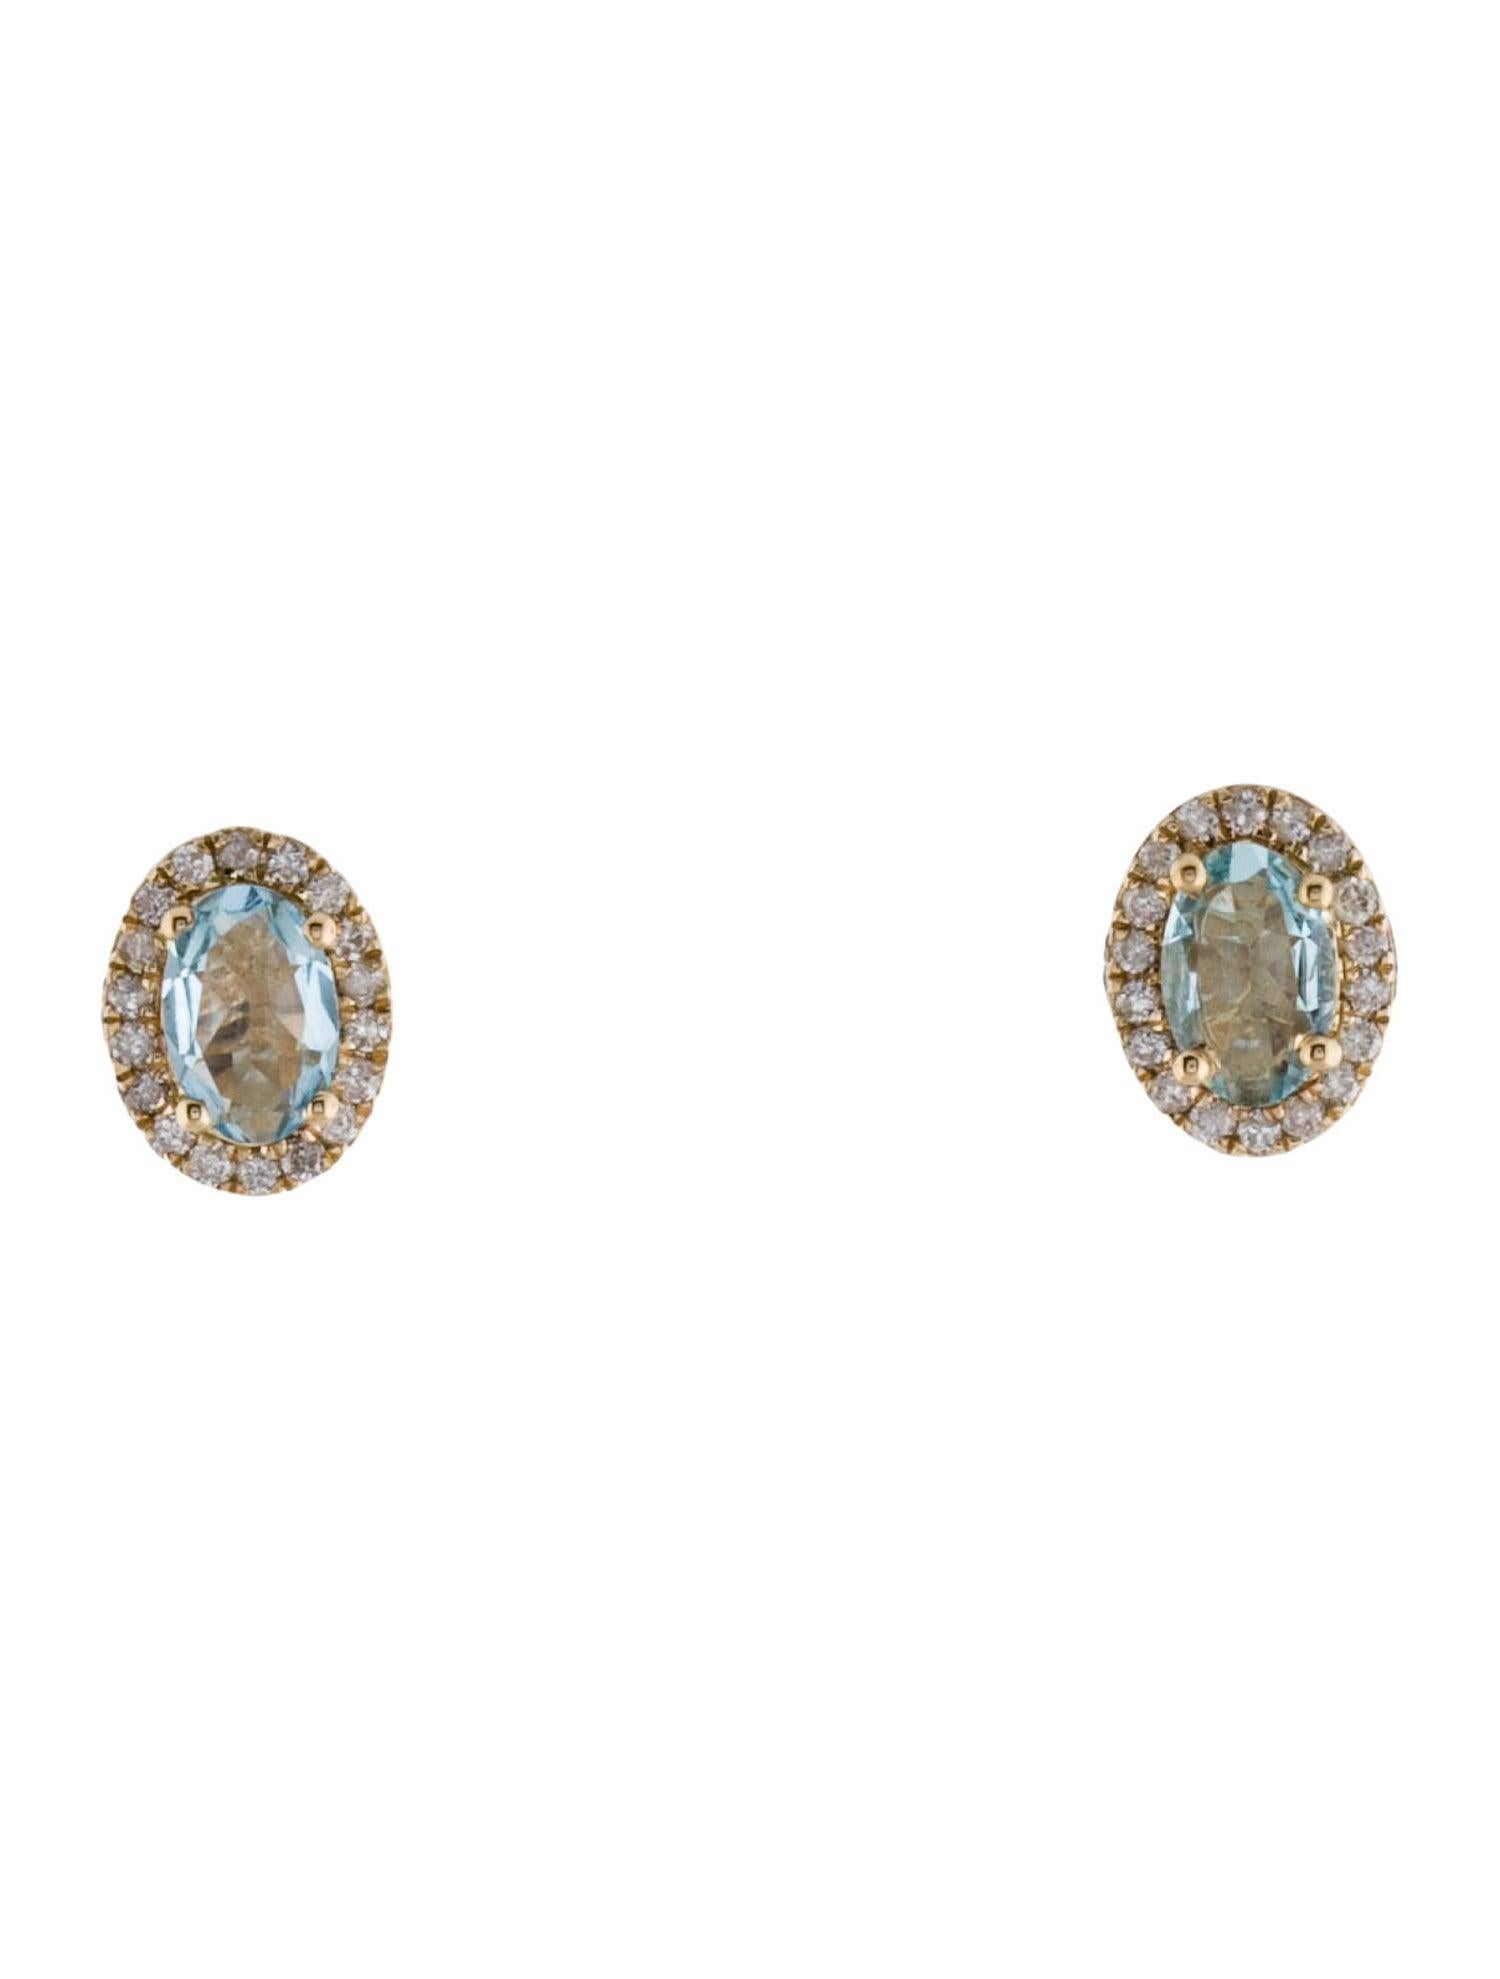 Elegant 14K Aquamarine & Diamond Stud Earrings - Gemstone Jewelry Collection In New Condition For Sale In Holtsville, NY